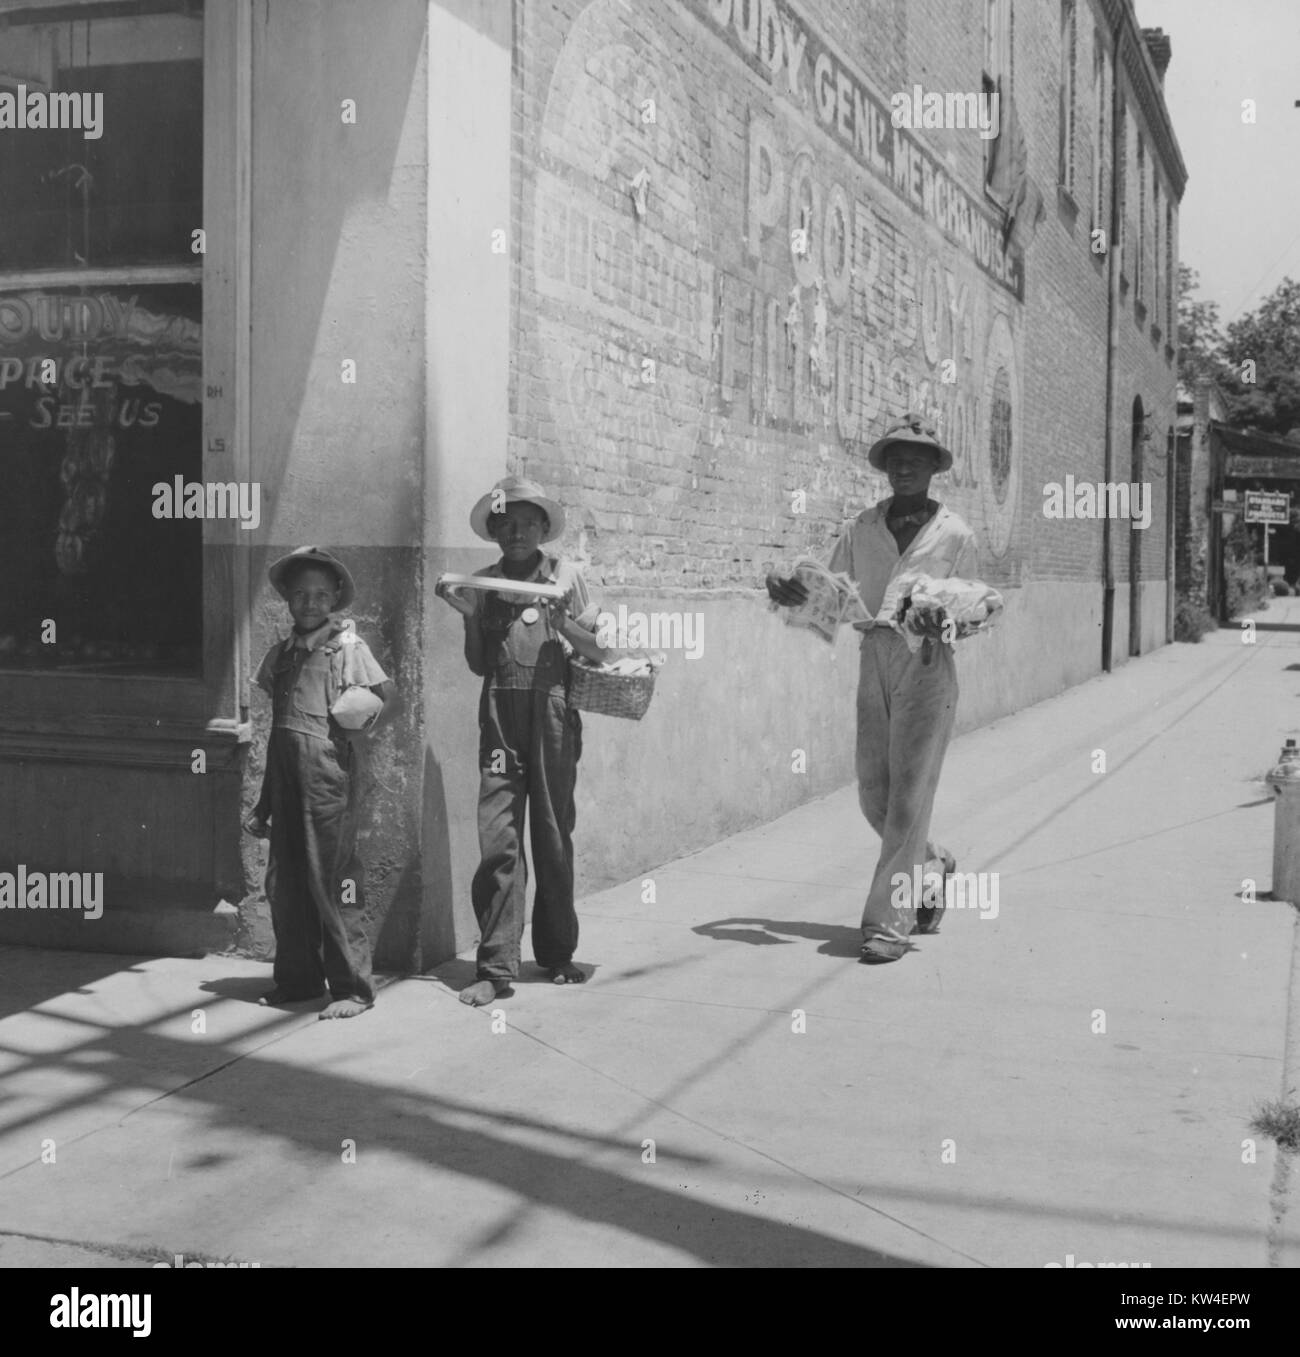 Young boys stand on a sidewalk by a commercial building holding various goods, in Port Gibson, Mississippi, August, 1940. Stock Photo